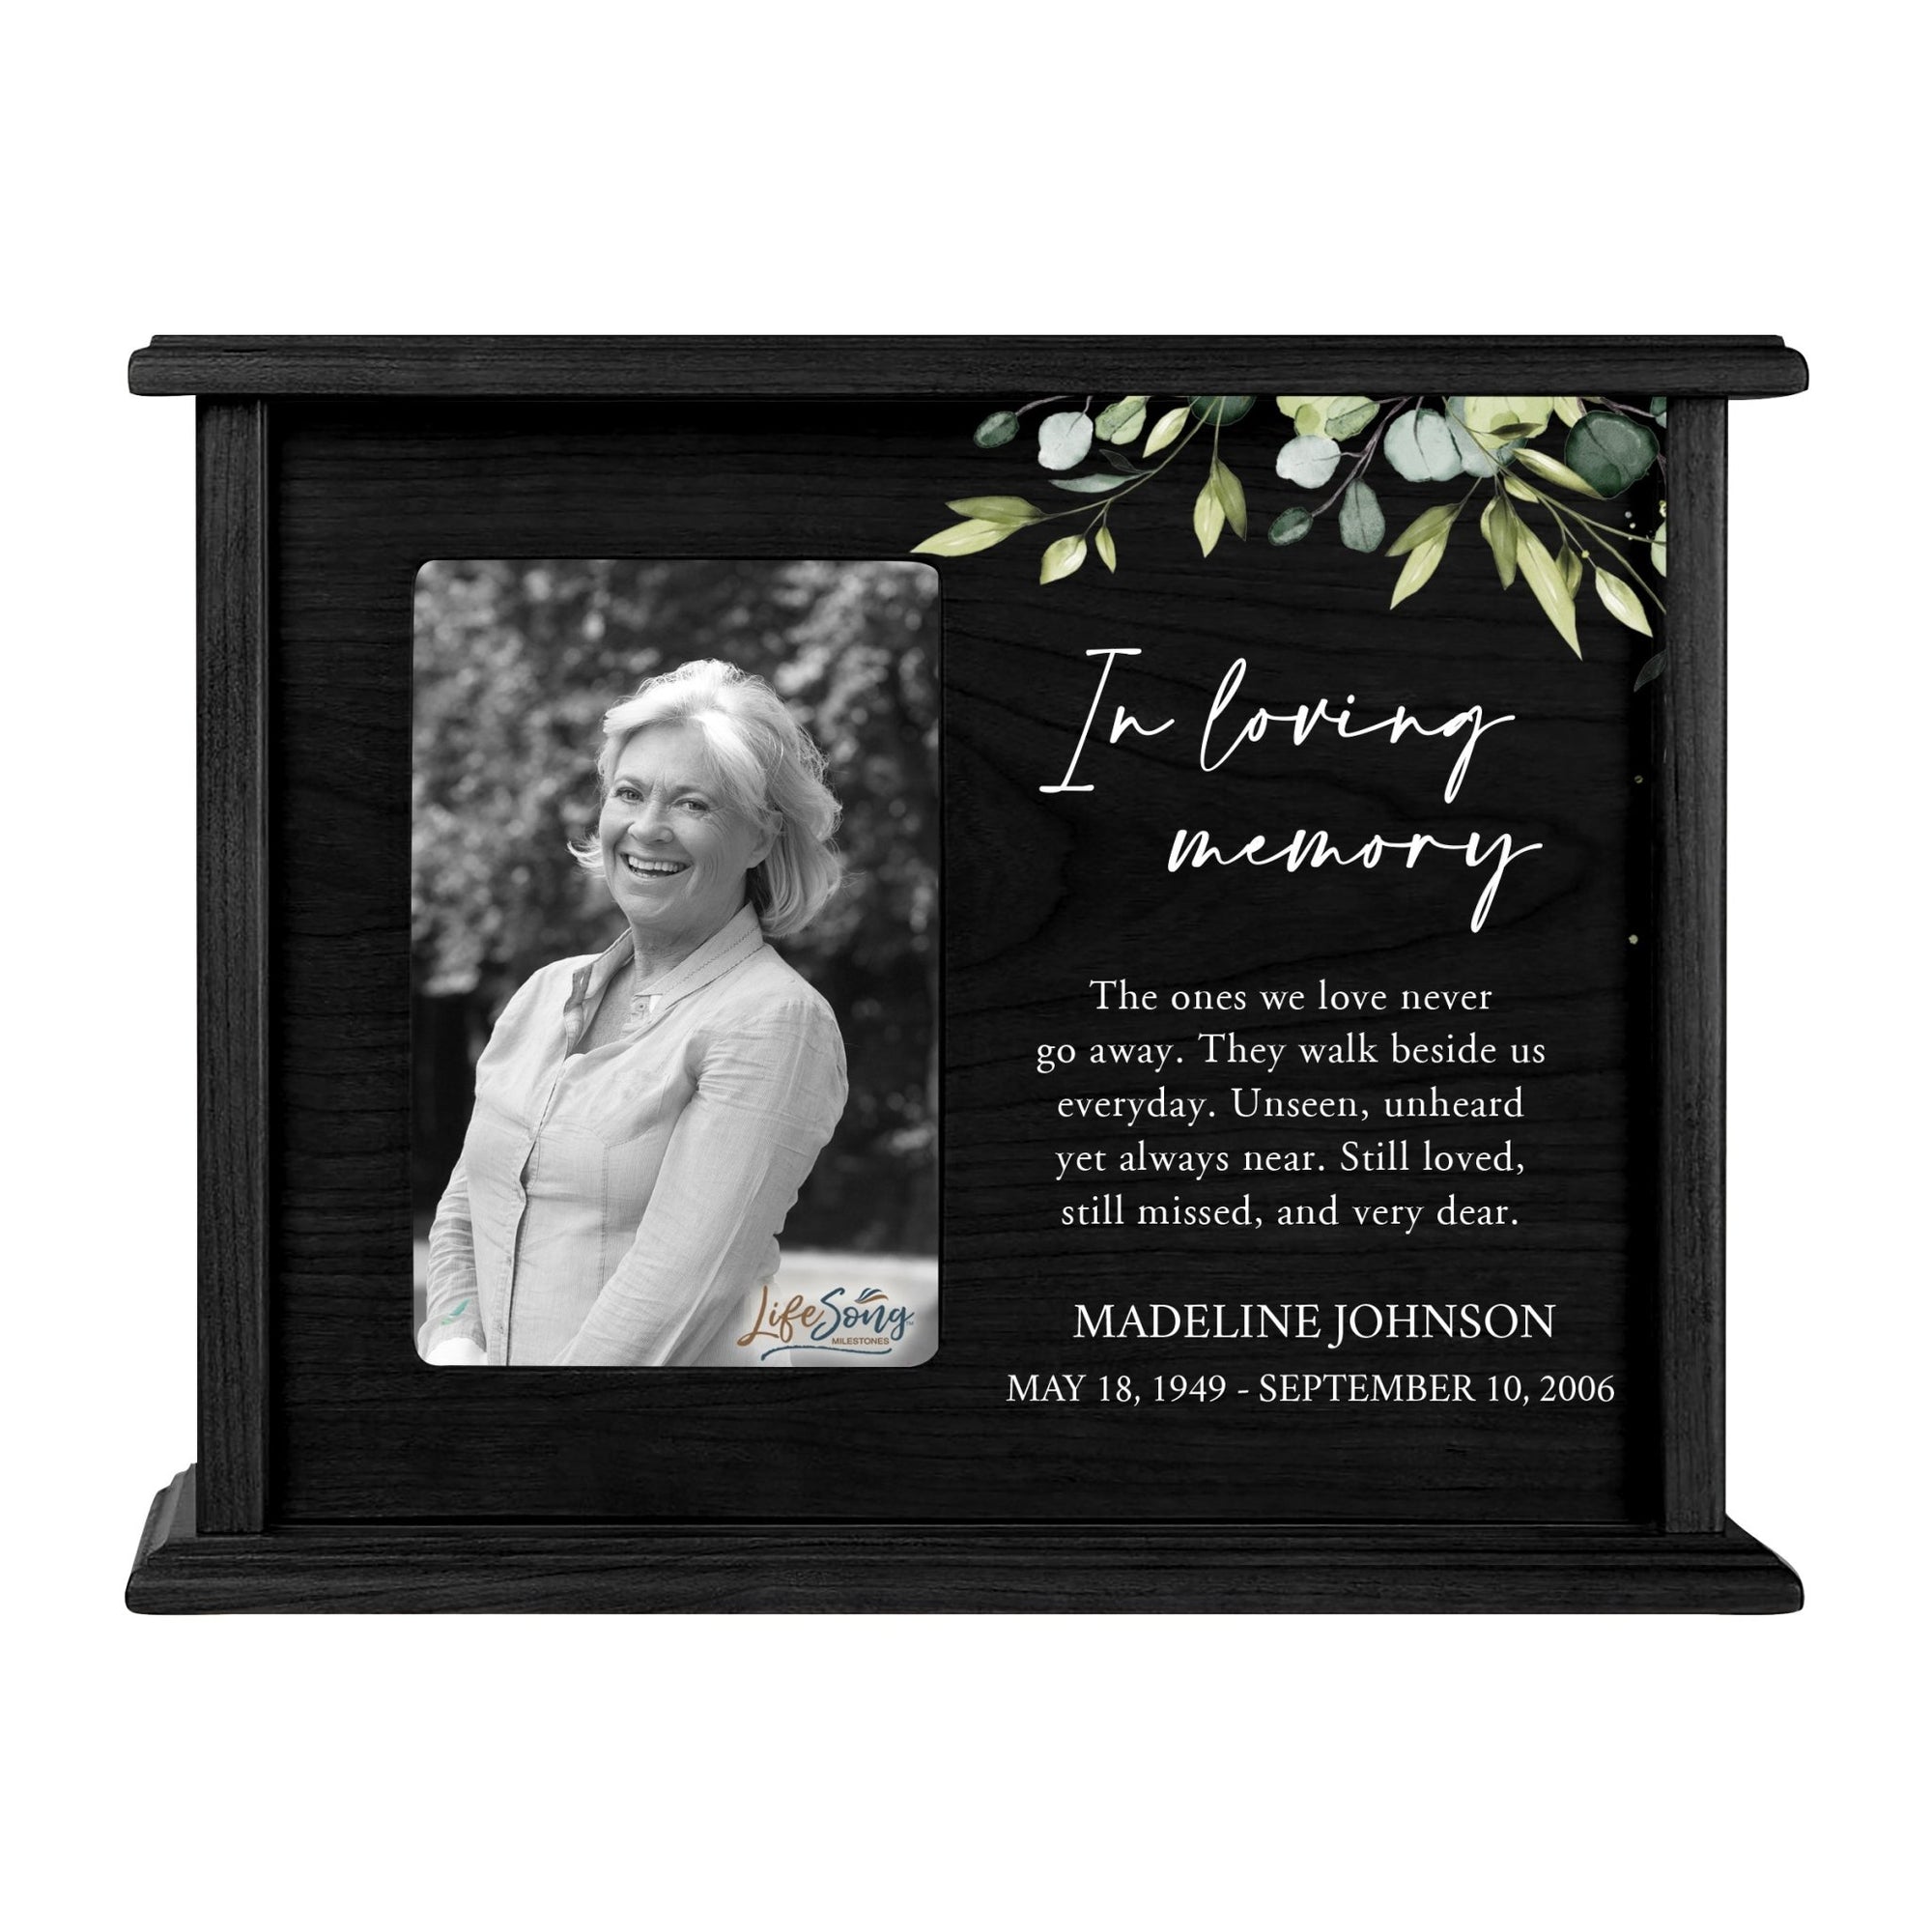 Personalized Memorial Cherry Wood 12 x 4.5 x 9 Cremation Urn Box with Picture Frame holds 200 cu in of Human Ashes and 4x6 Photo - In Loving Memory (Unseen) - LifeSong Milestones